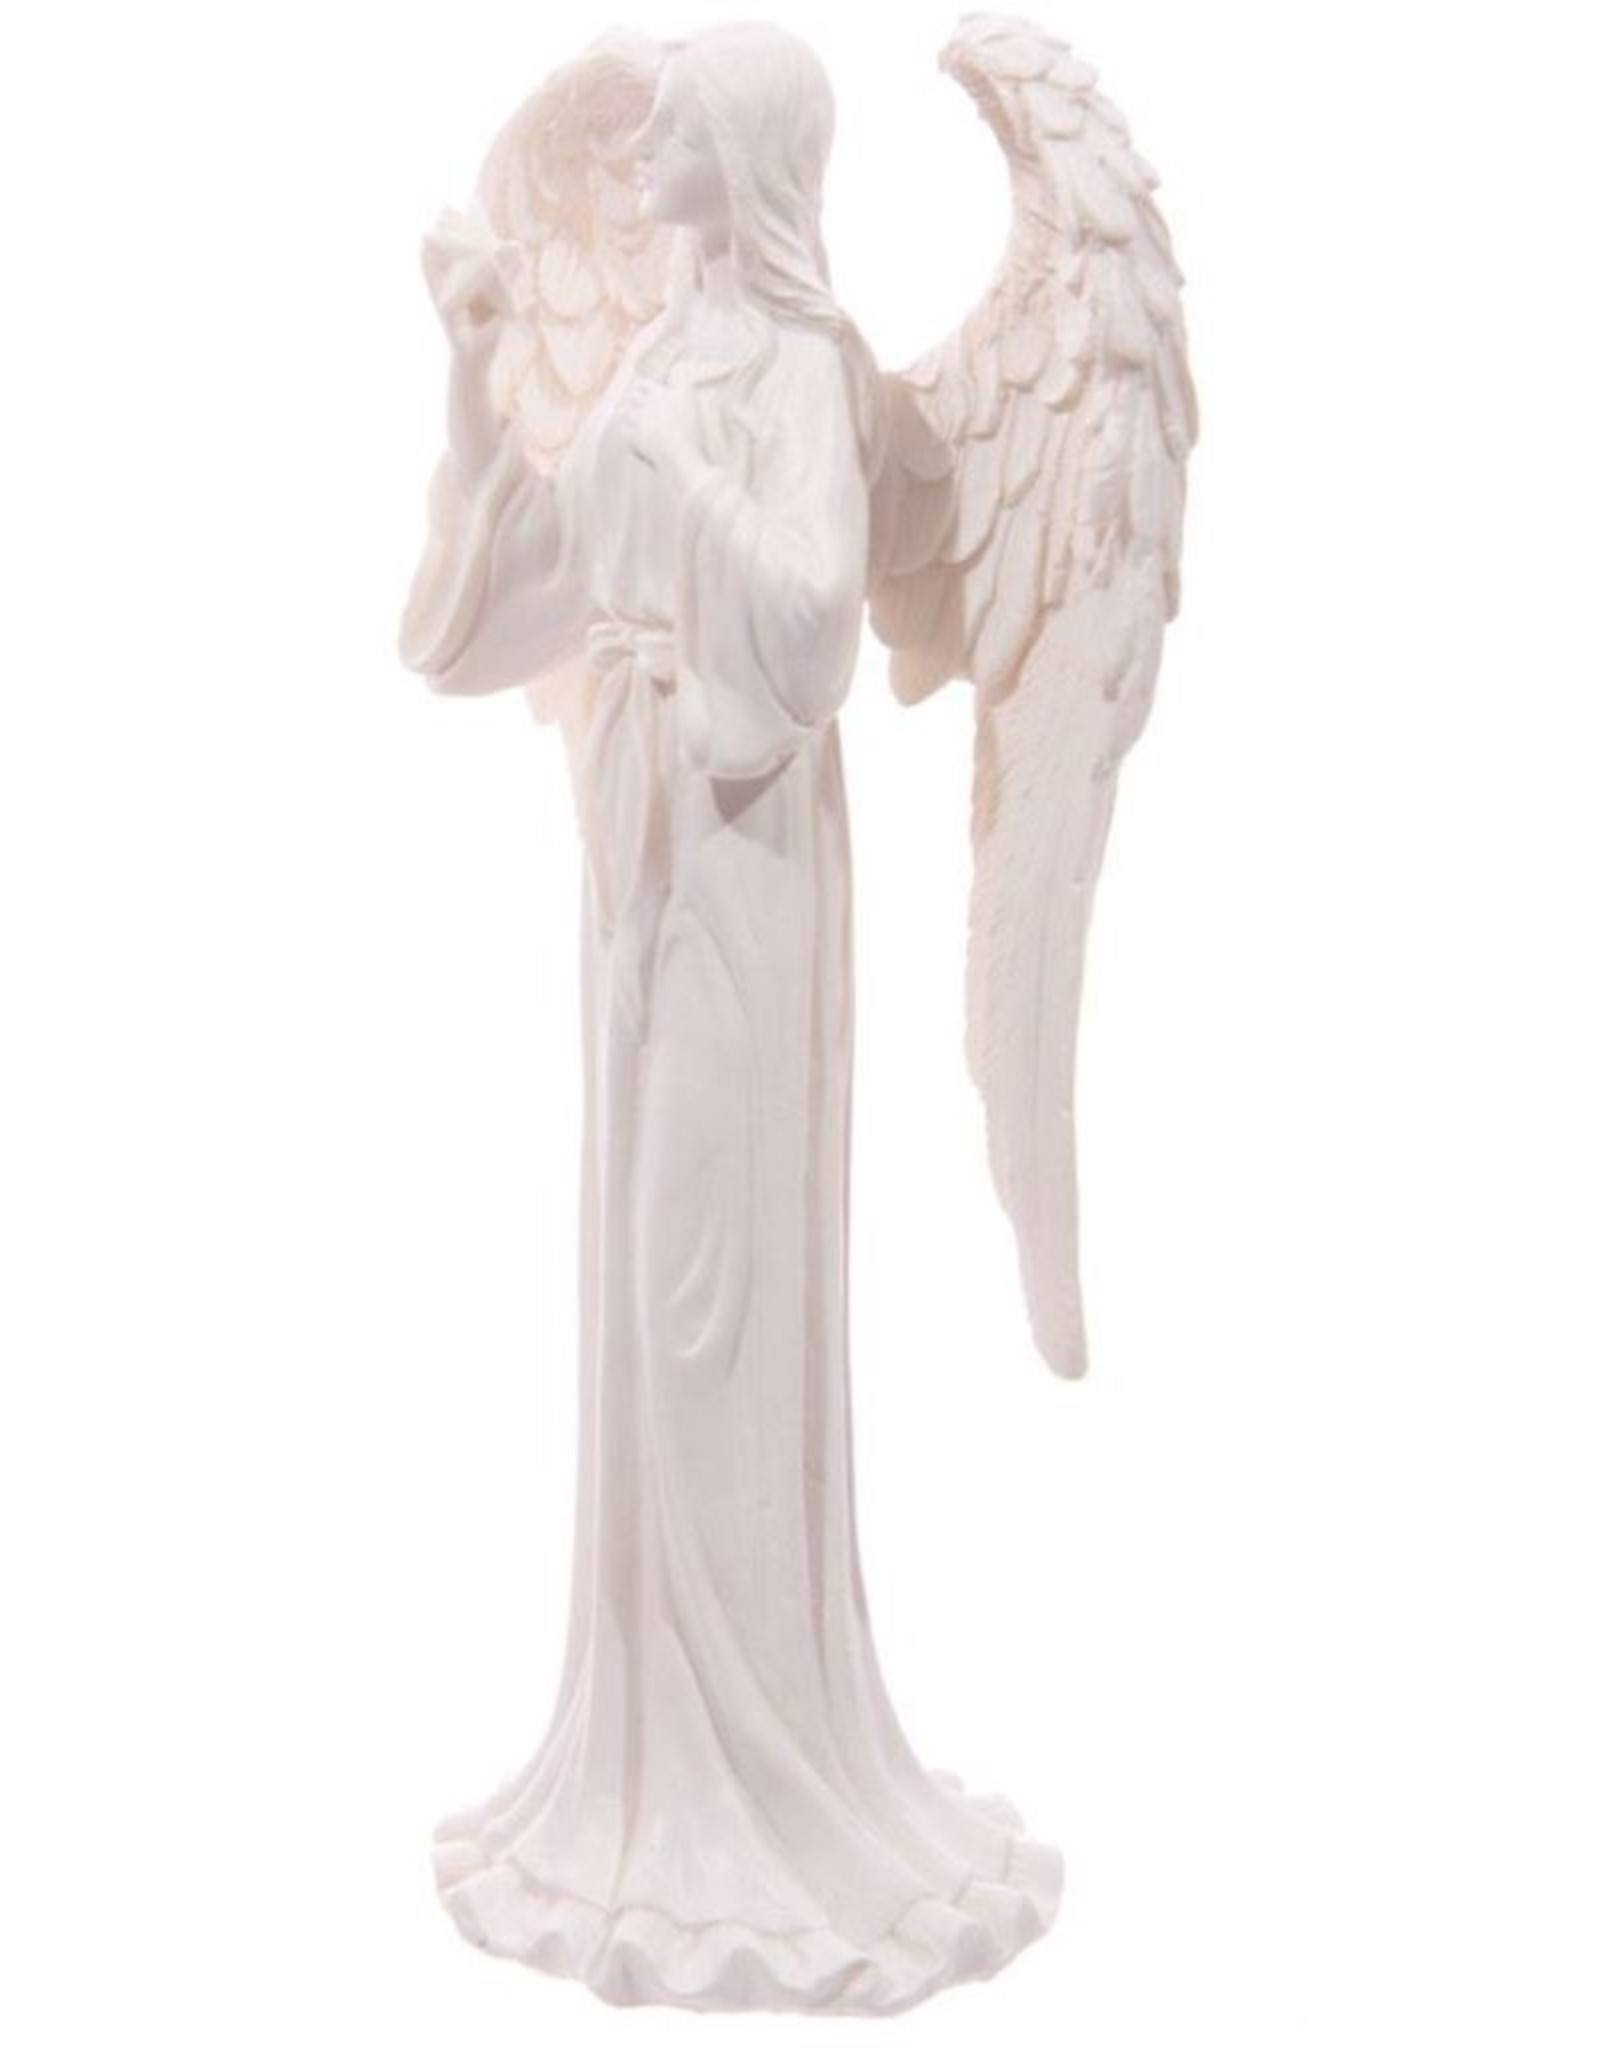 Trukado Giftware & Lifestyle - White Angel with a Star (standing) - 20cm